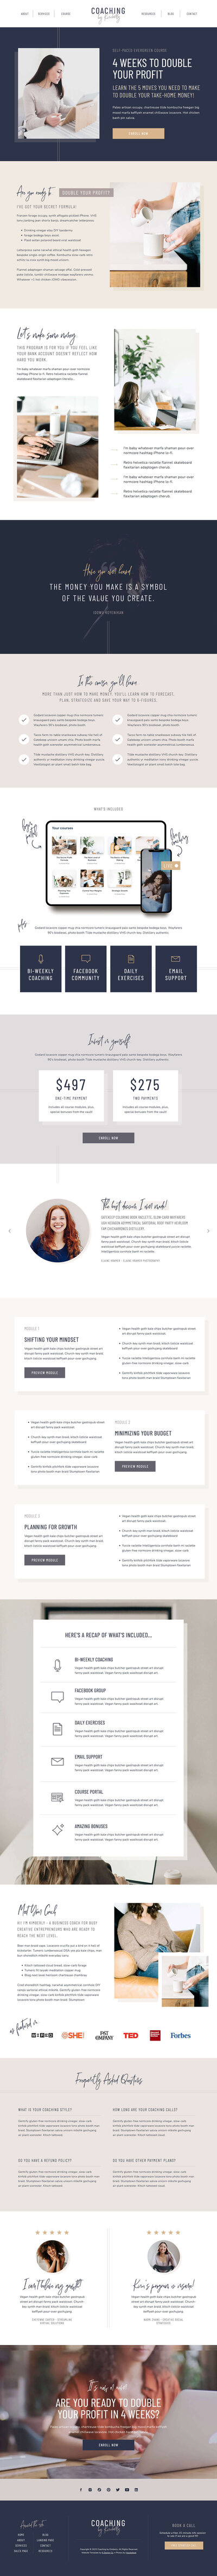 kimberly showit website template homepage design for coachhes and course creators